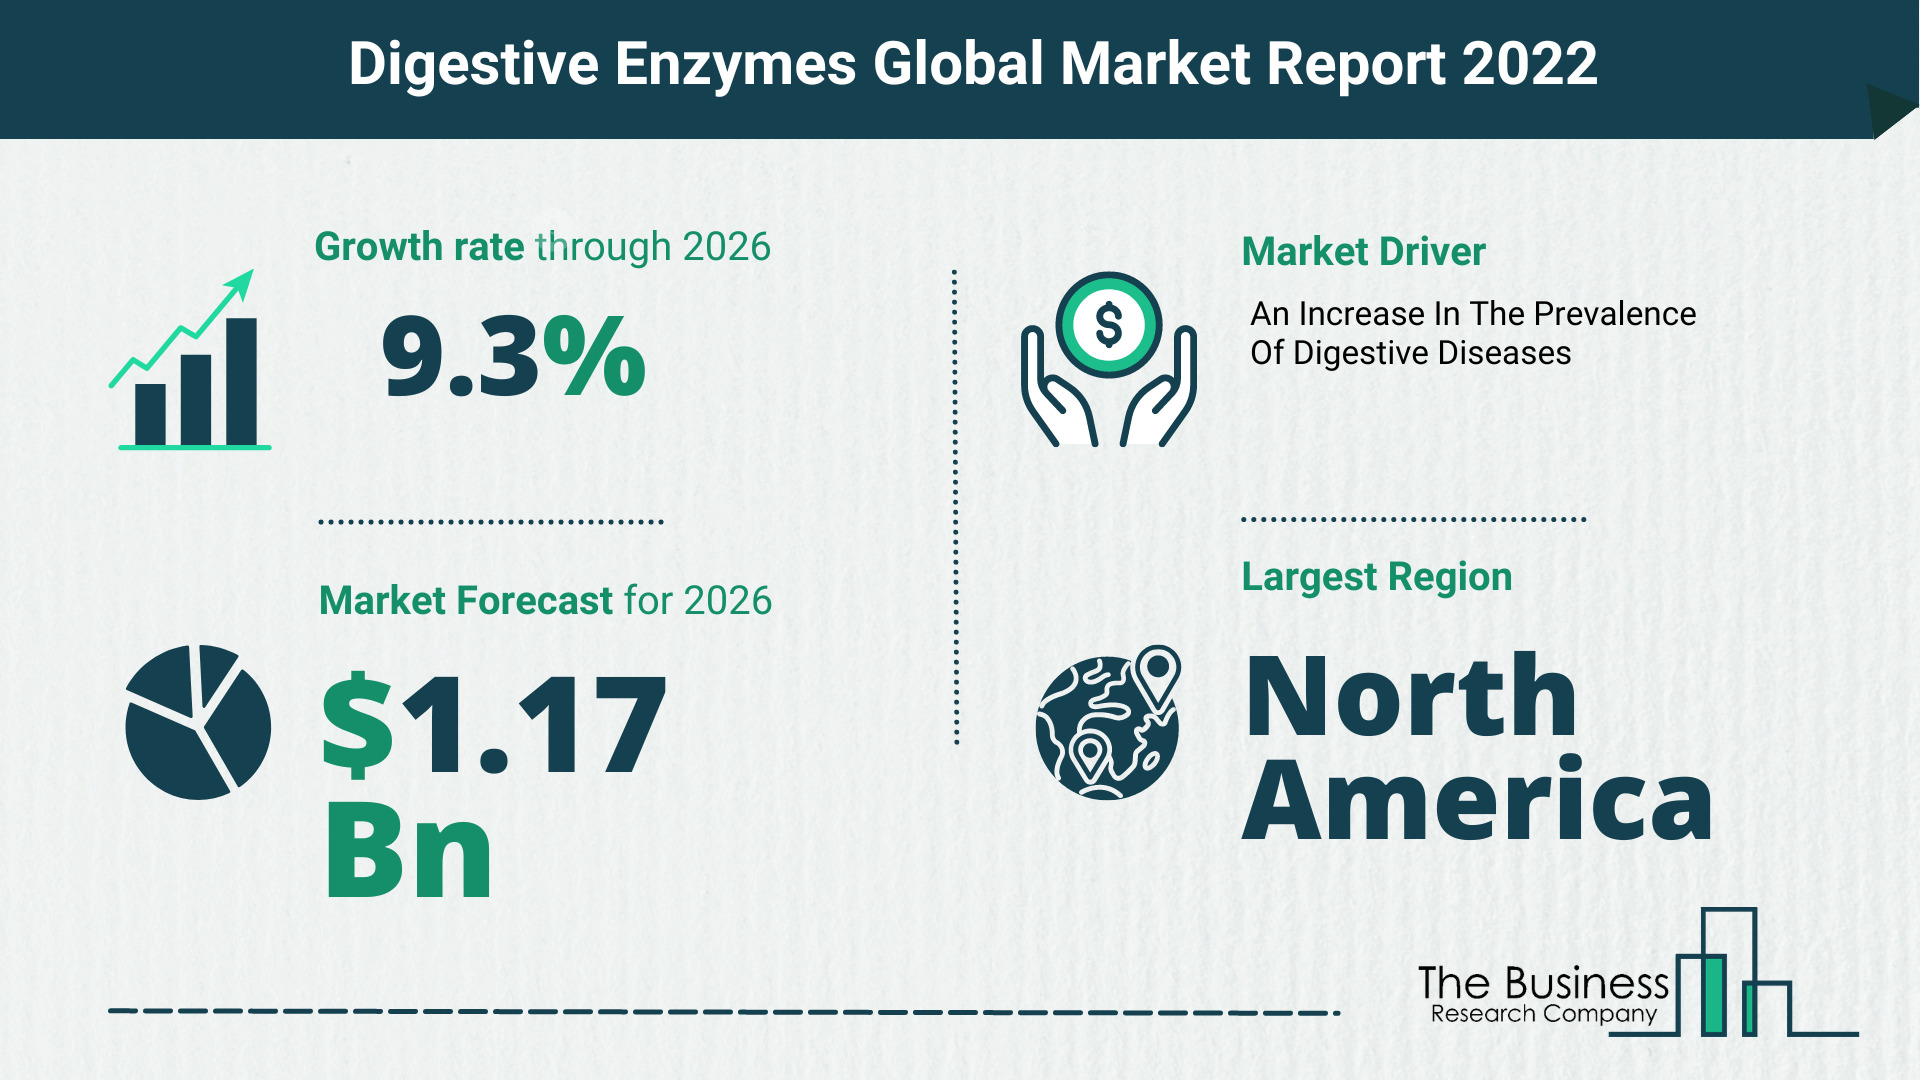 What Is The Digestive Enzymes Market Overview In 2022?